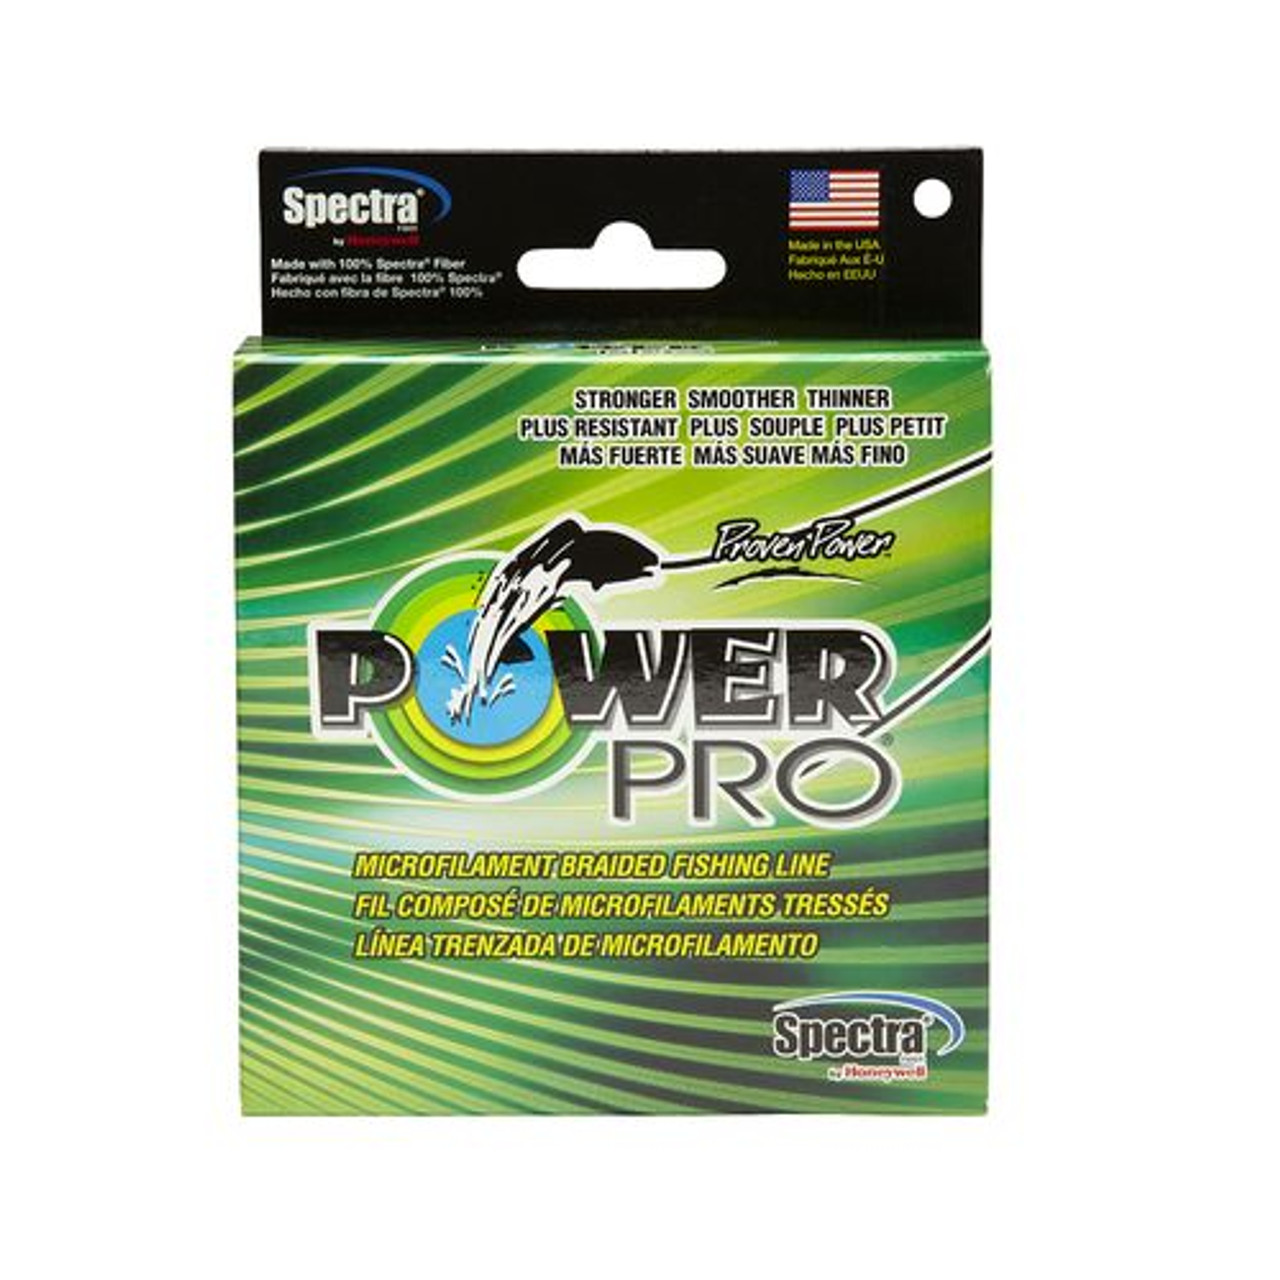 Spectra Power Pro Braided Fishing Line 3000 Yards - Moss Green